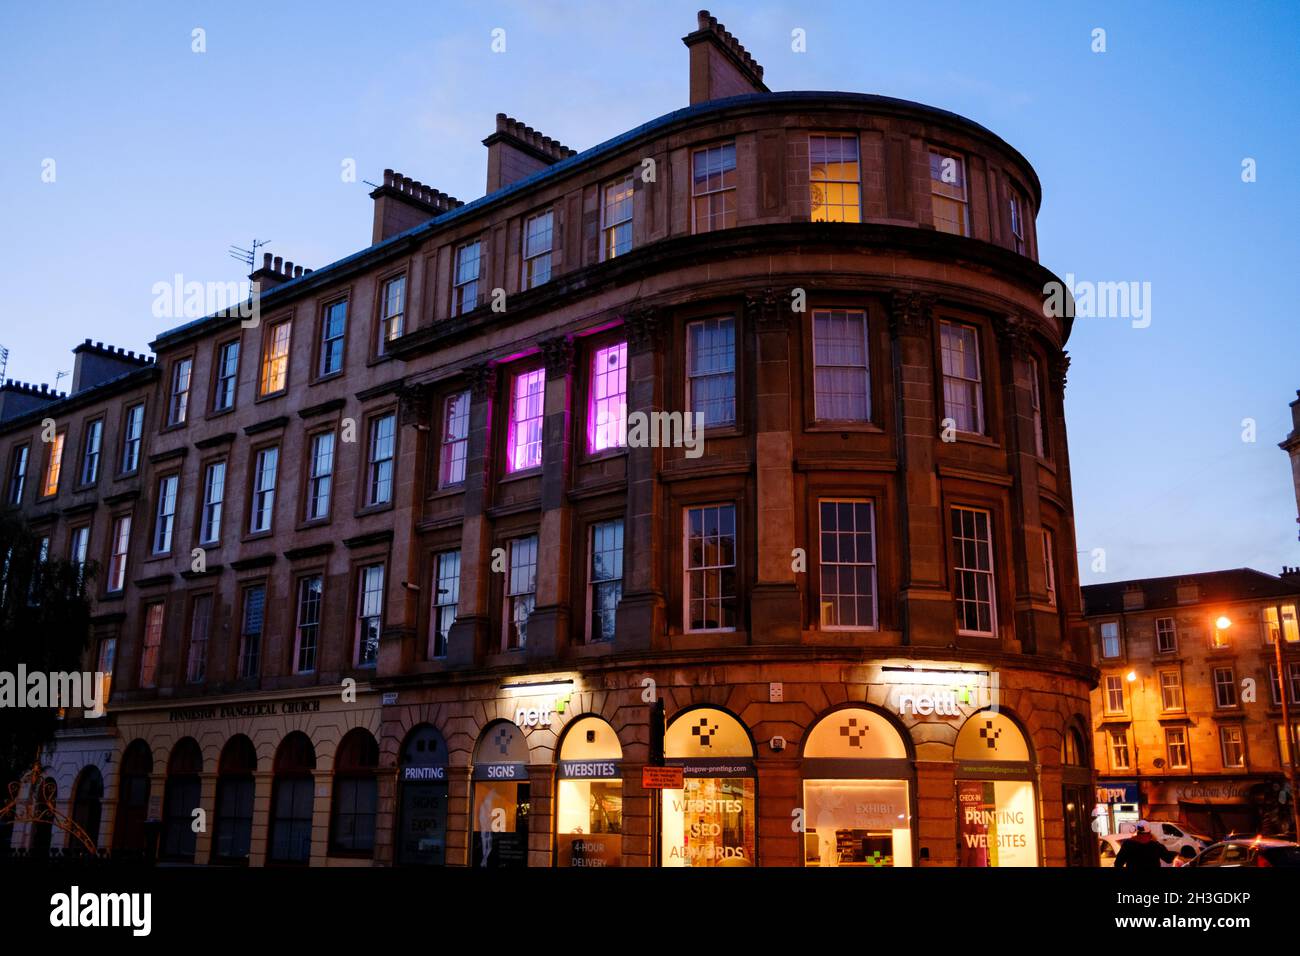 Finnieston, Glasgow tenements at night. Neon lights and shop front. Blue light, golden hour. City centre Stock Photo